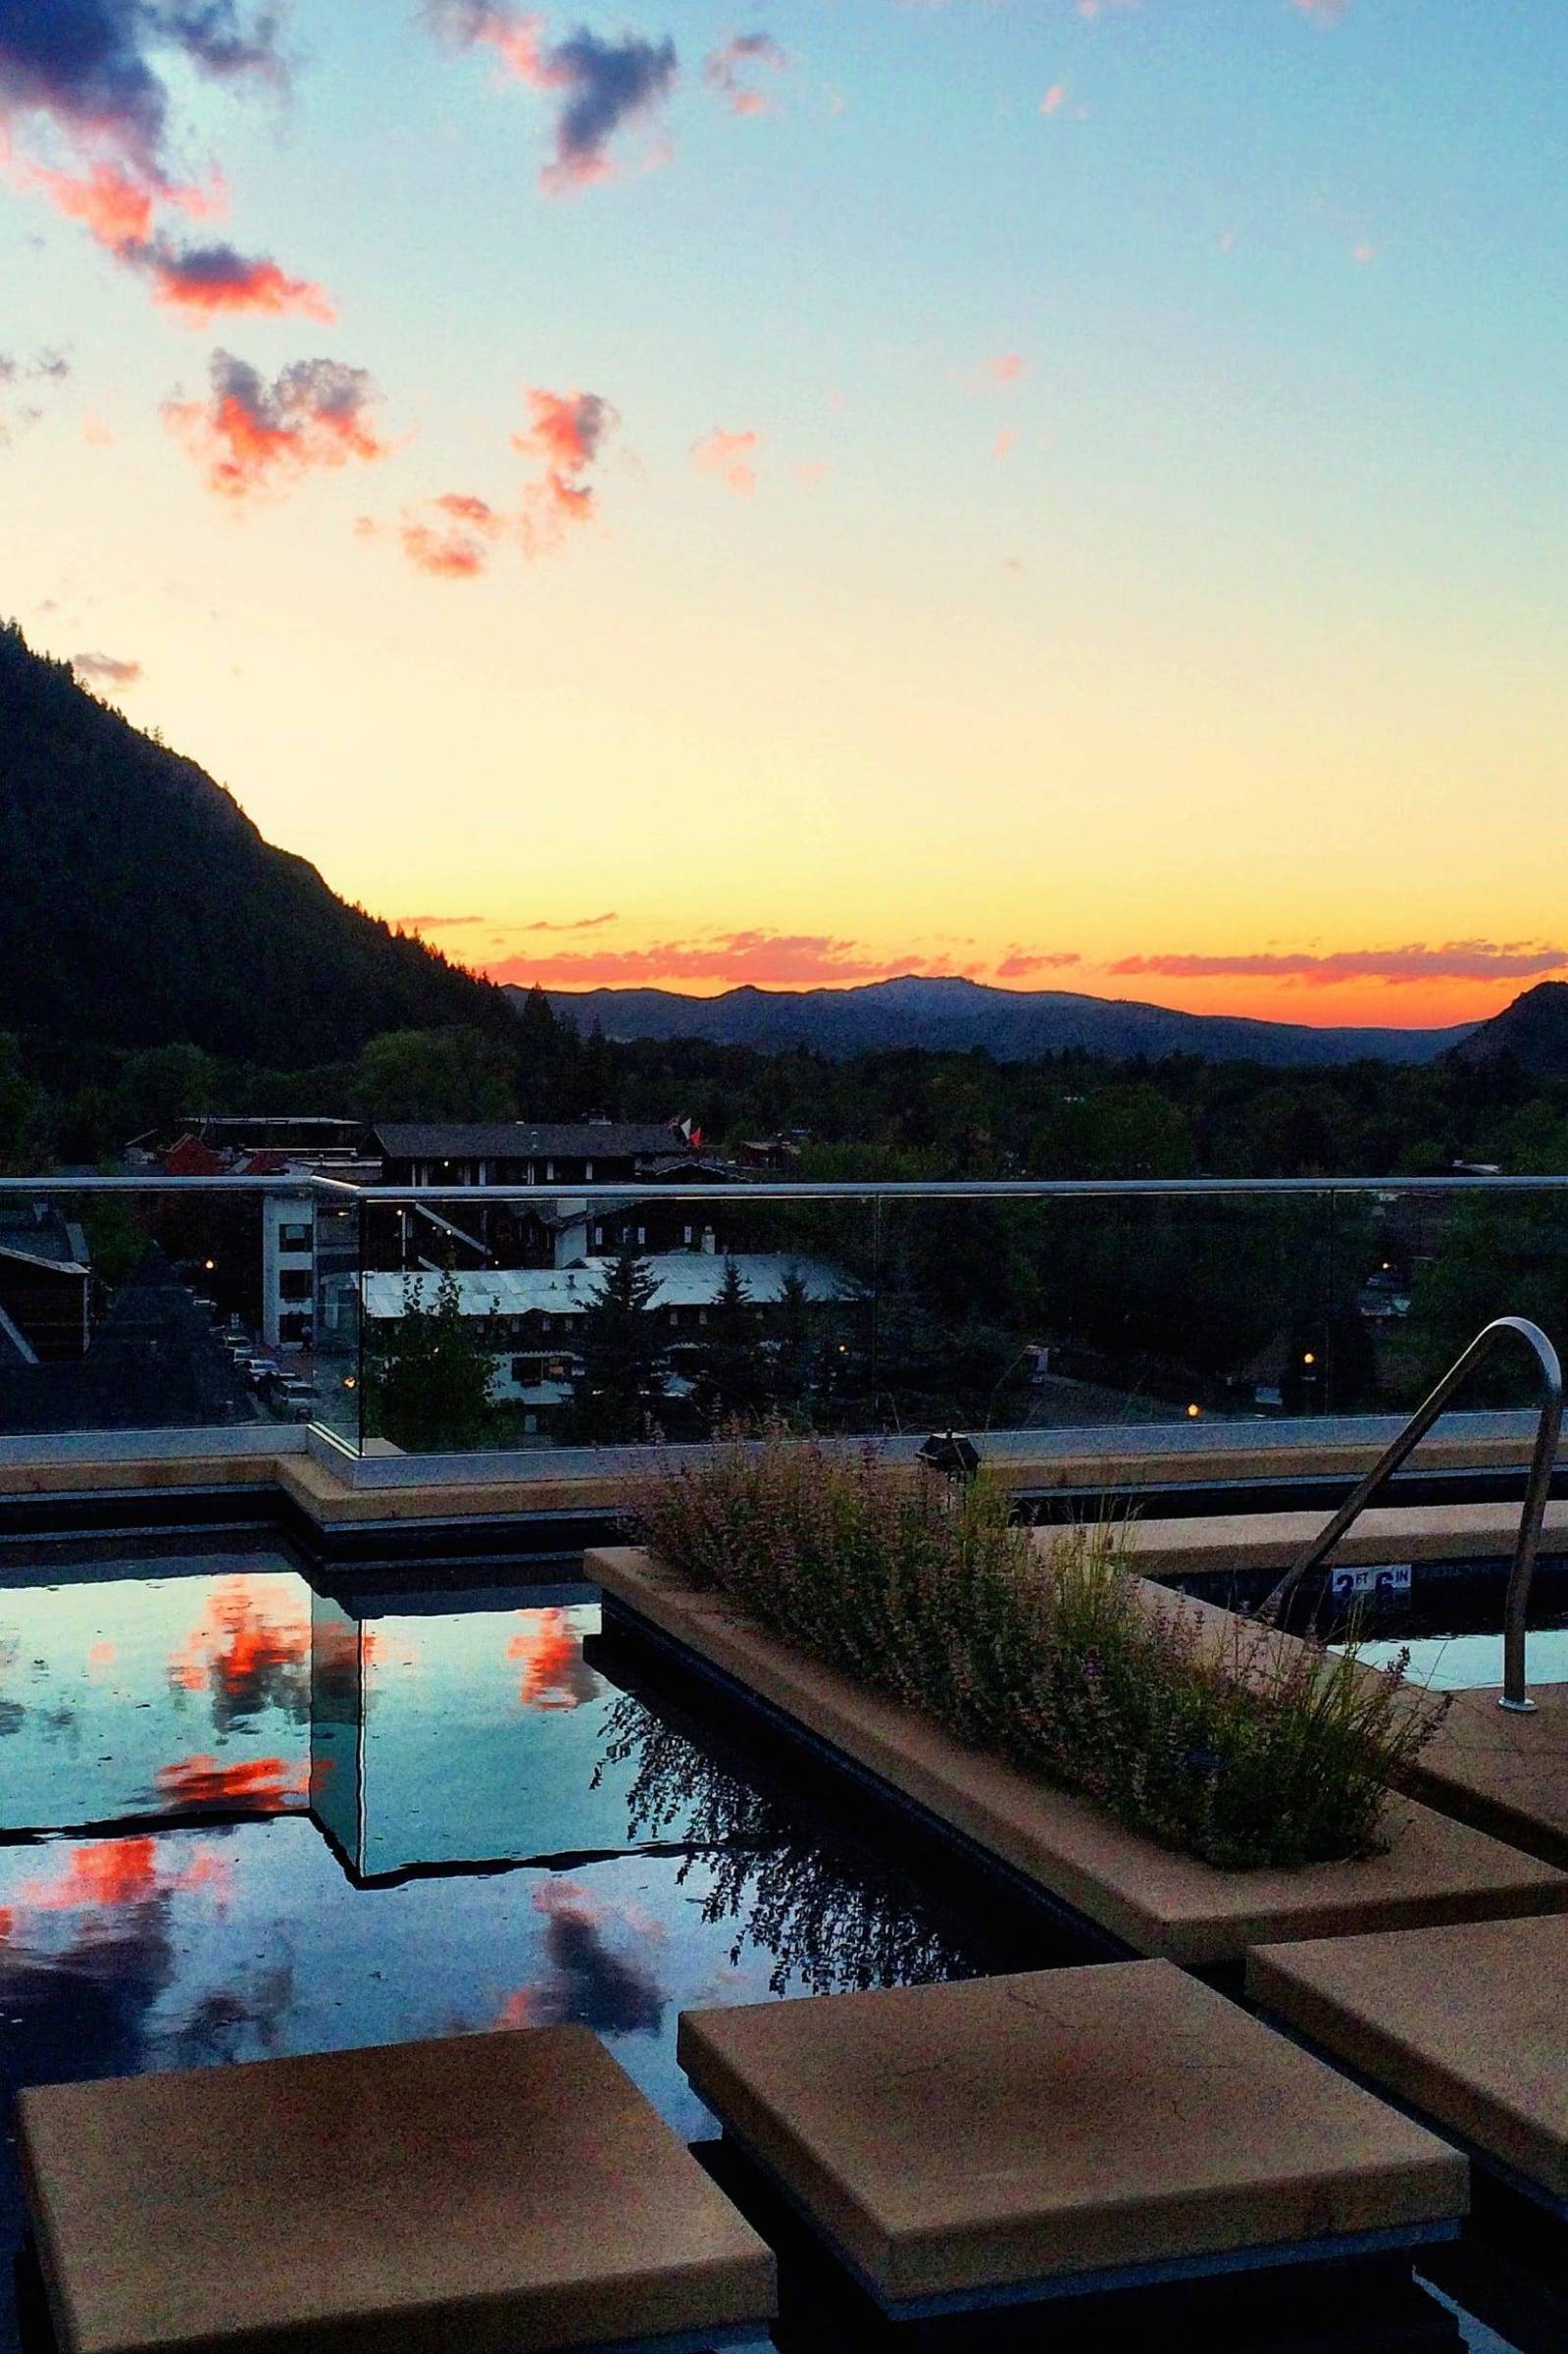 Sunset at The Little Nell in Aspen, CO.